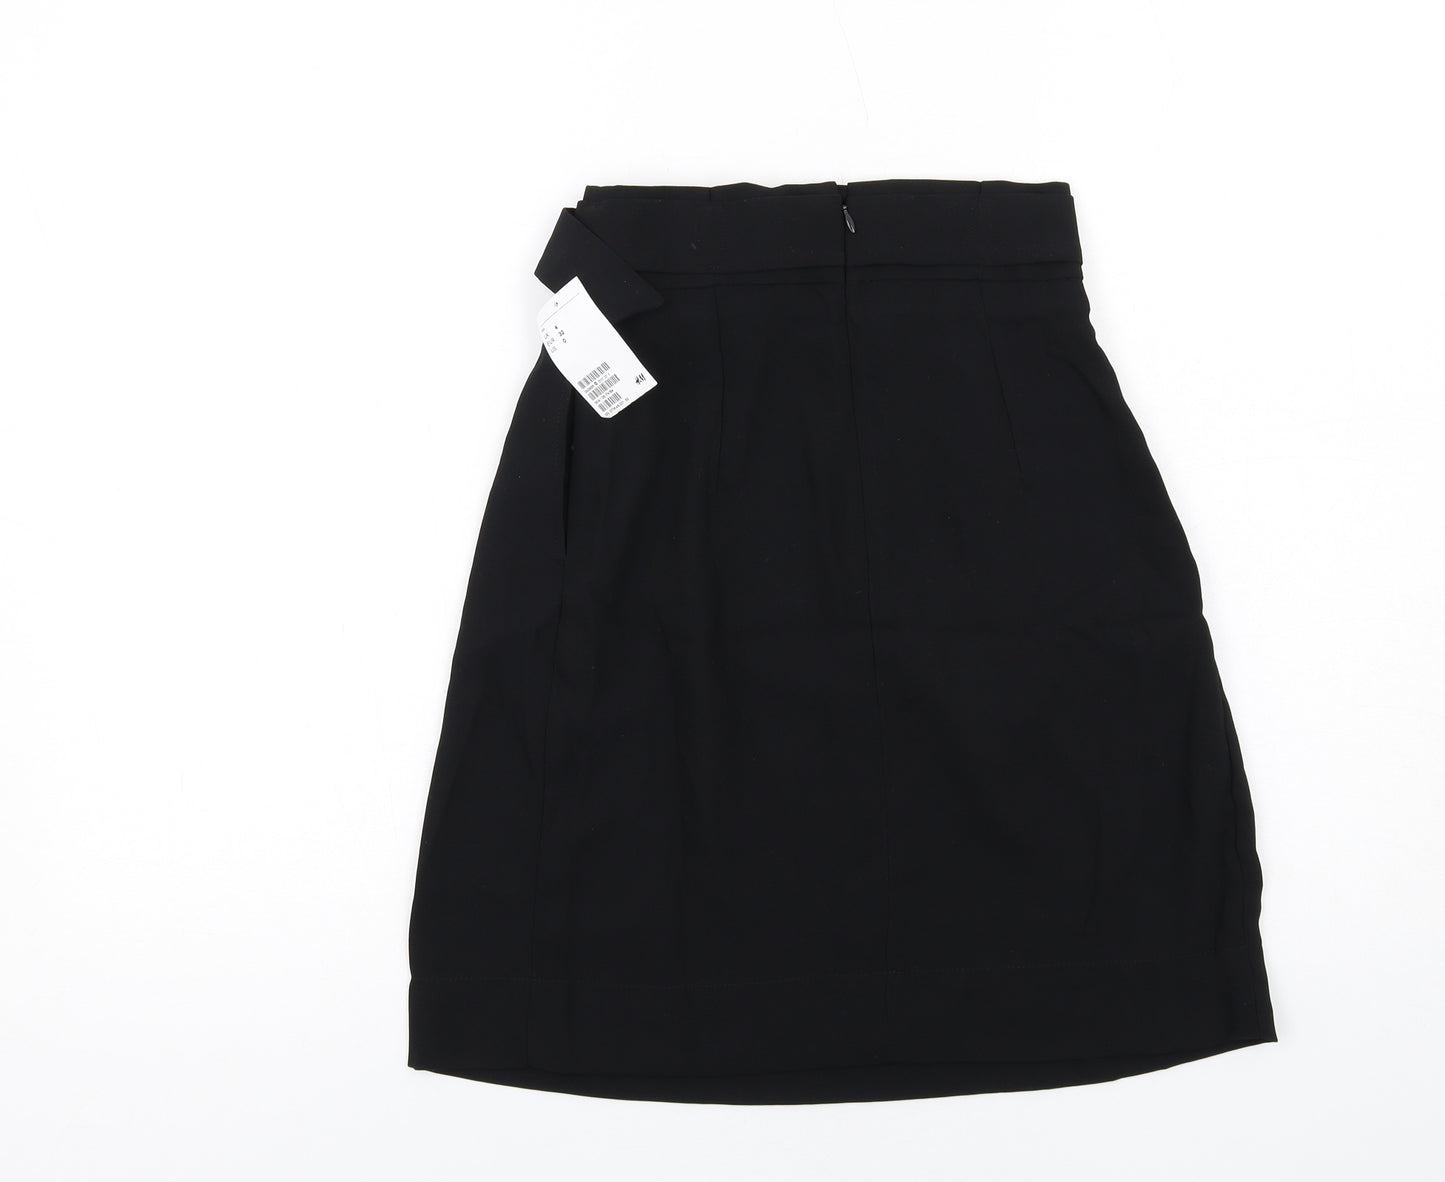 H&M Womens Black Polyester Tulip Skirt Size 4 Zip - Belt included